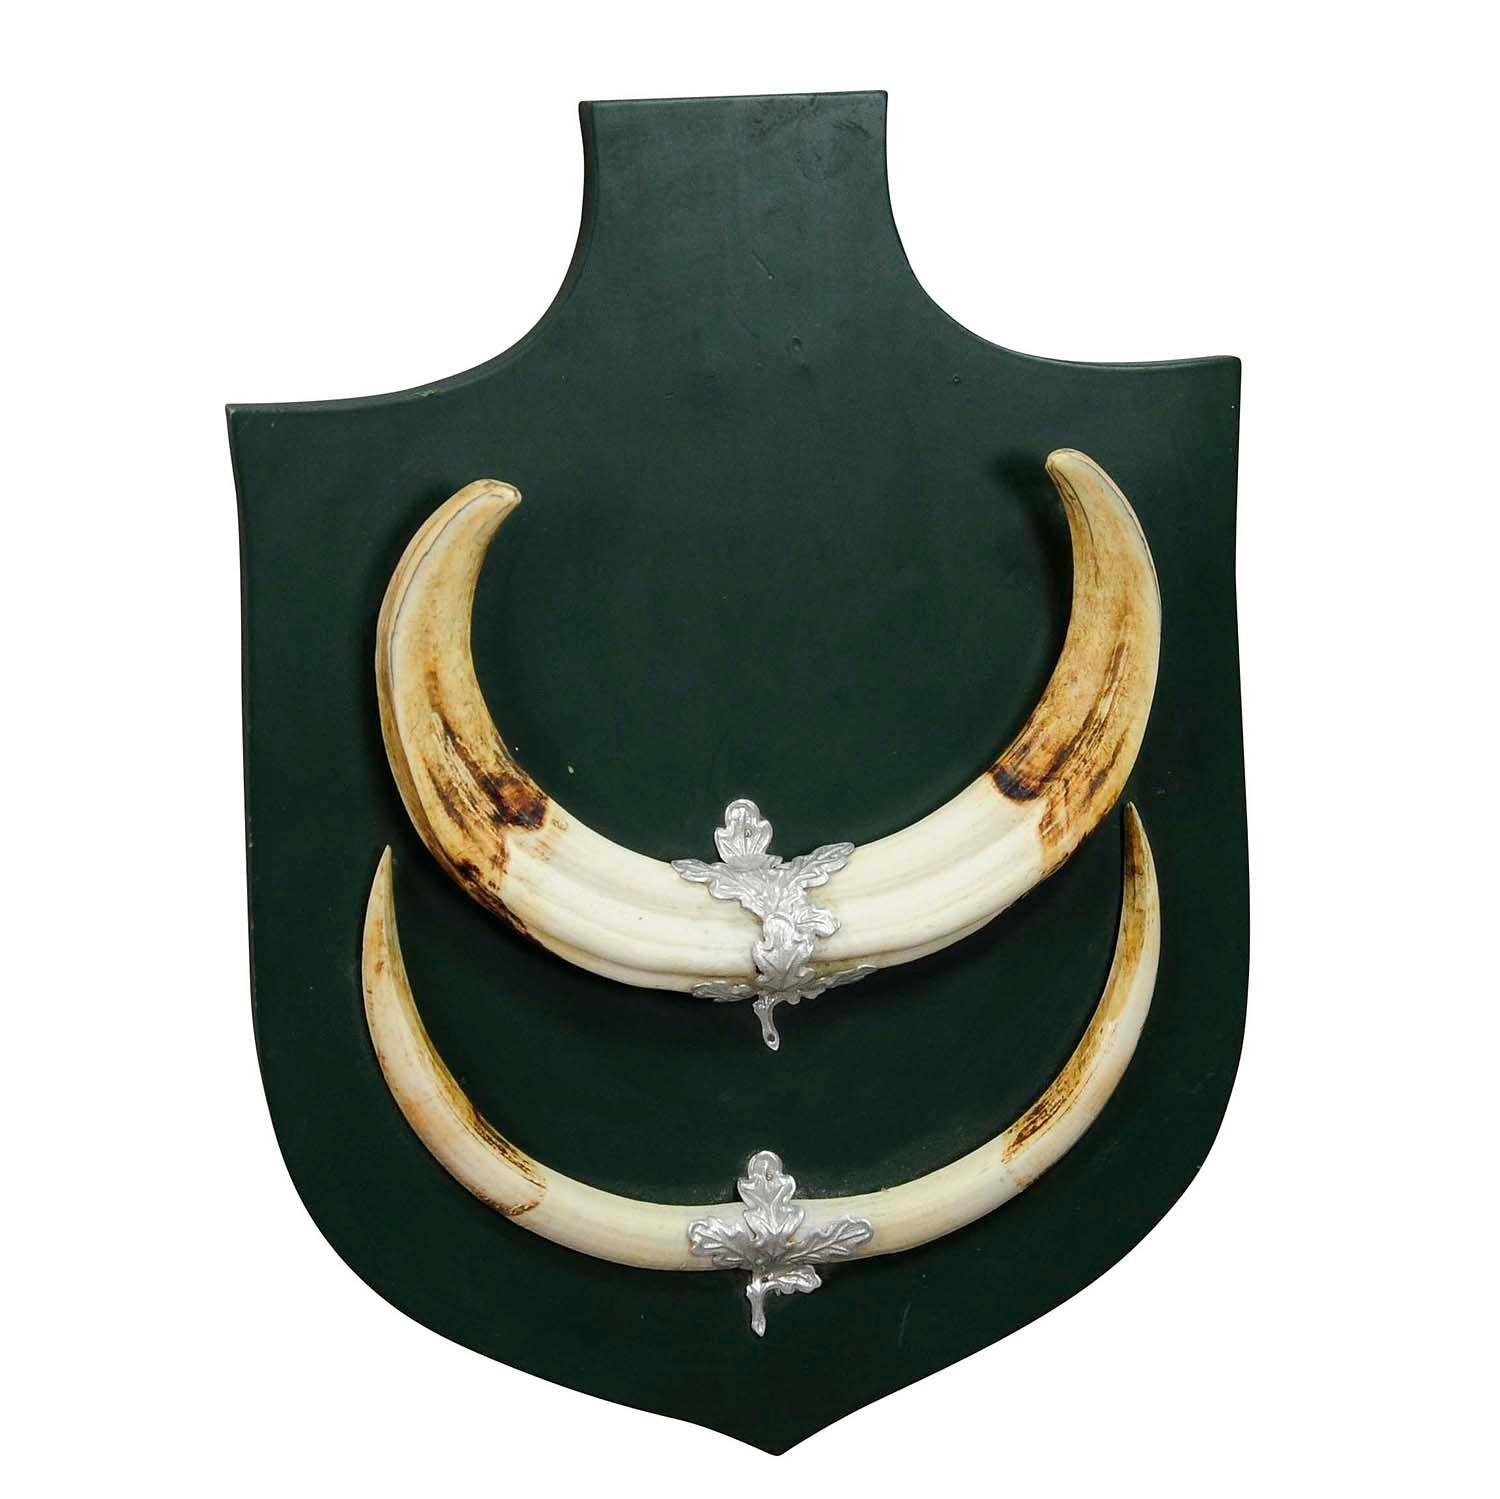 Great African Wart hog trophy mount on wooden plaque

A large vintage wild boar (Sus scrofa) trophy on wooden plaque with dark green finish. The trophy comes from the stately home of Palace Salem in South Germany and was shot in the late 20th